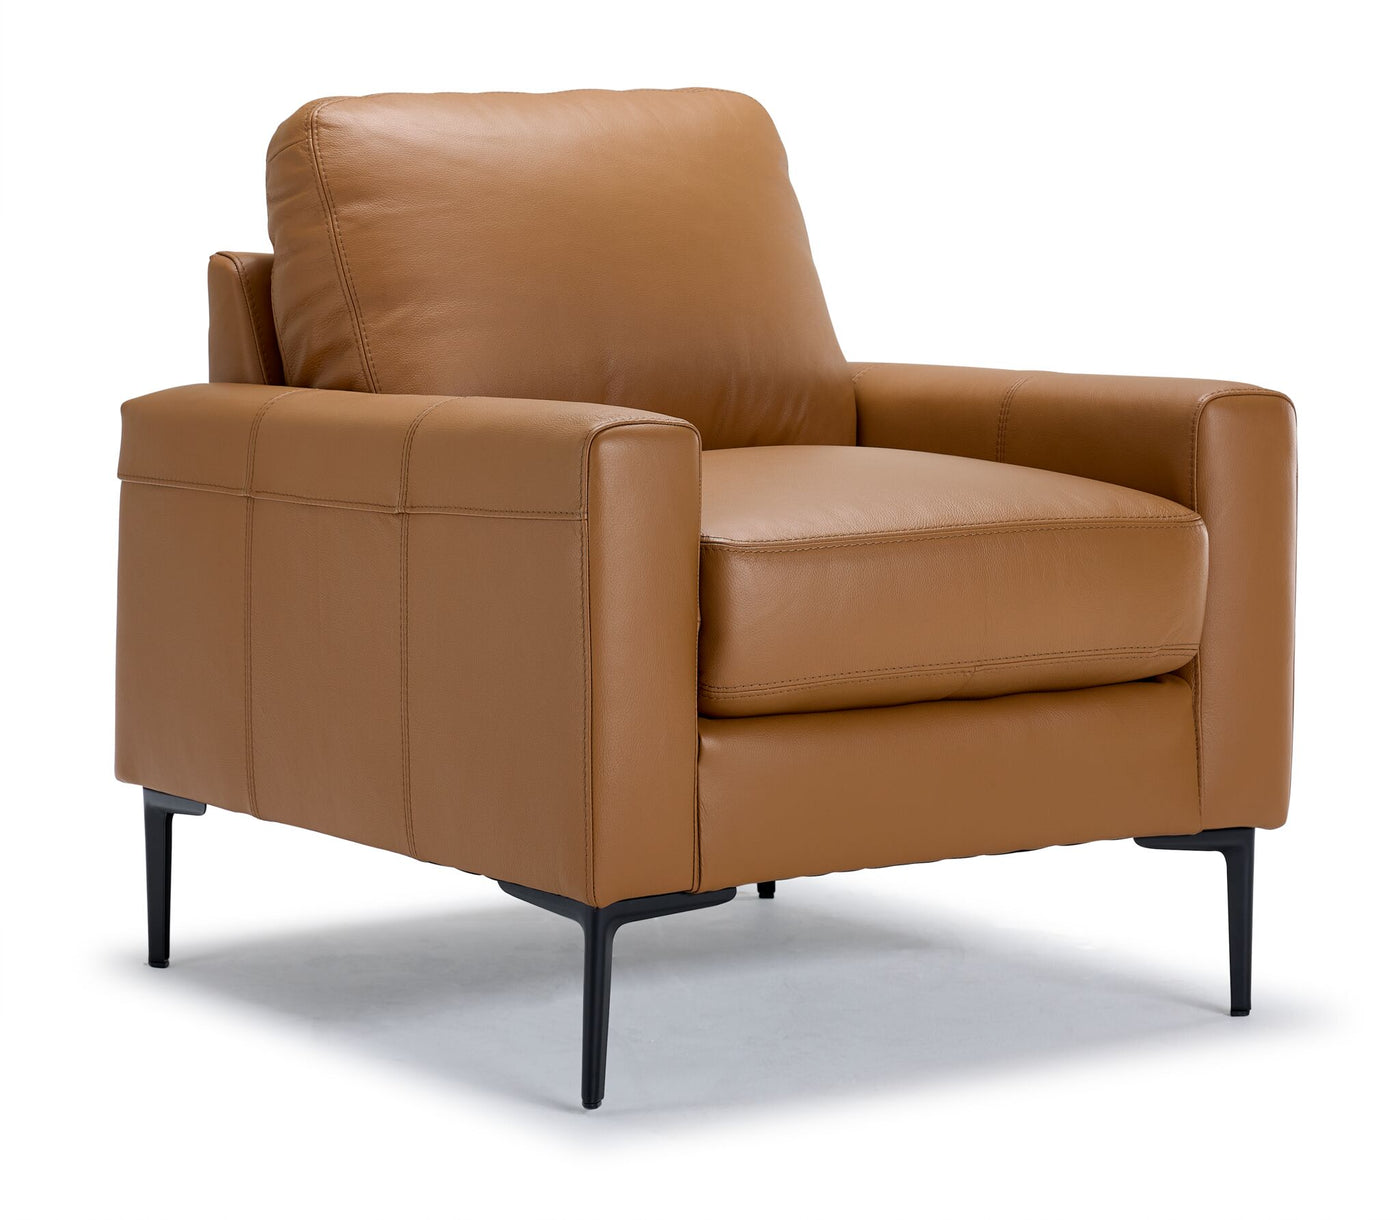 Chito Leather Sofa and Chair Set - Saddle